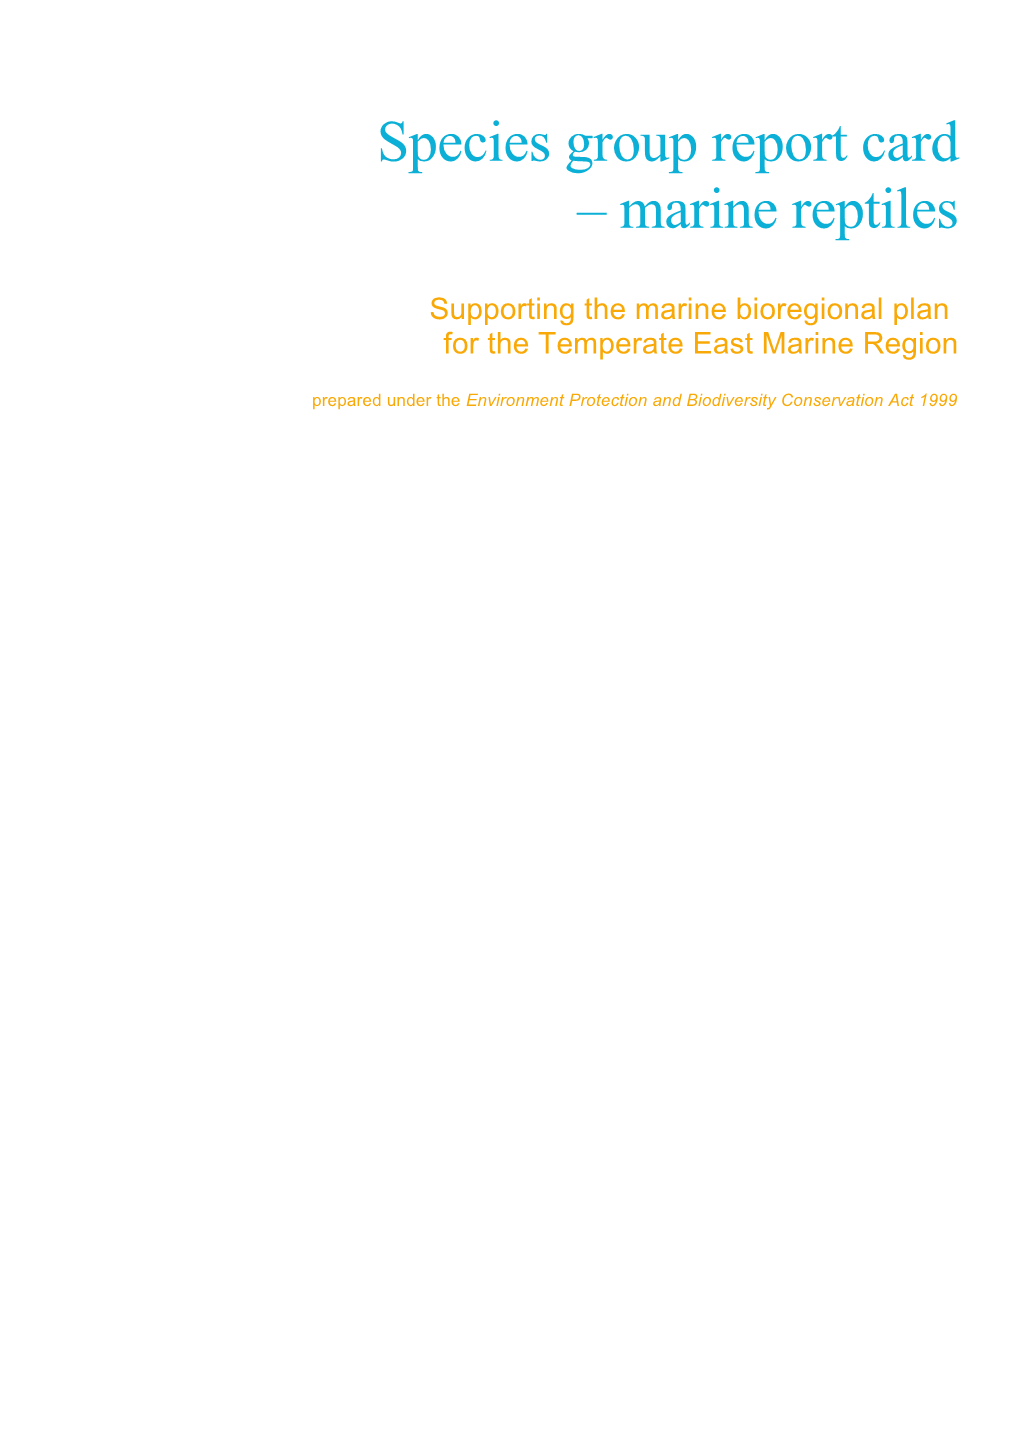 Species Group Report Card - Marine Reptiles - Supporting the Marine Bioregional Plan For